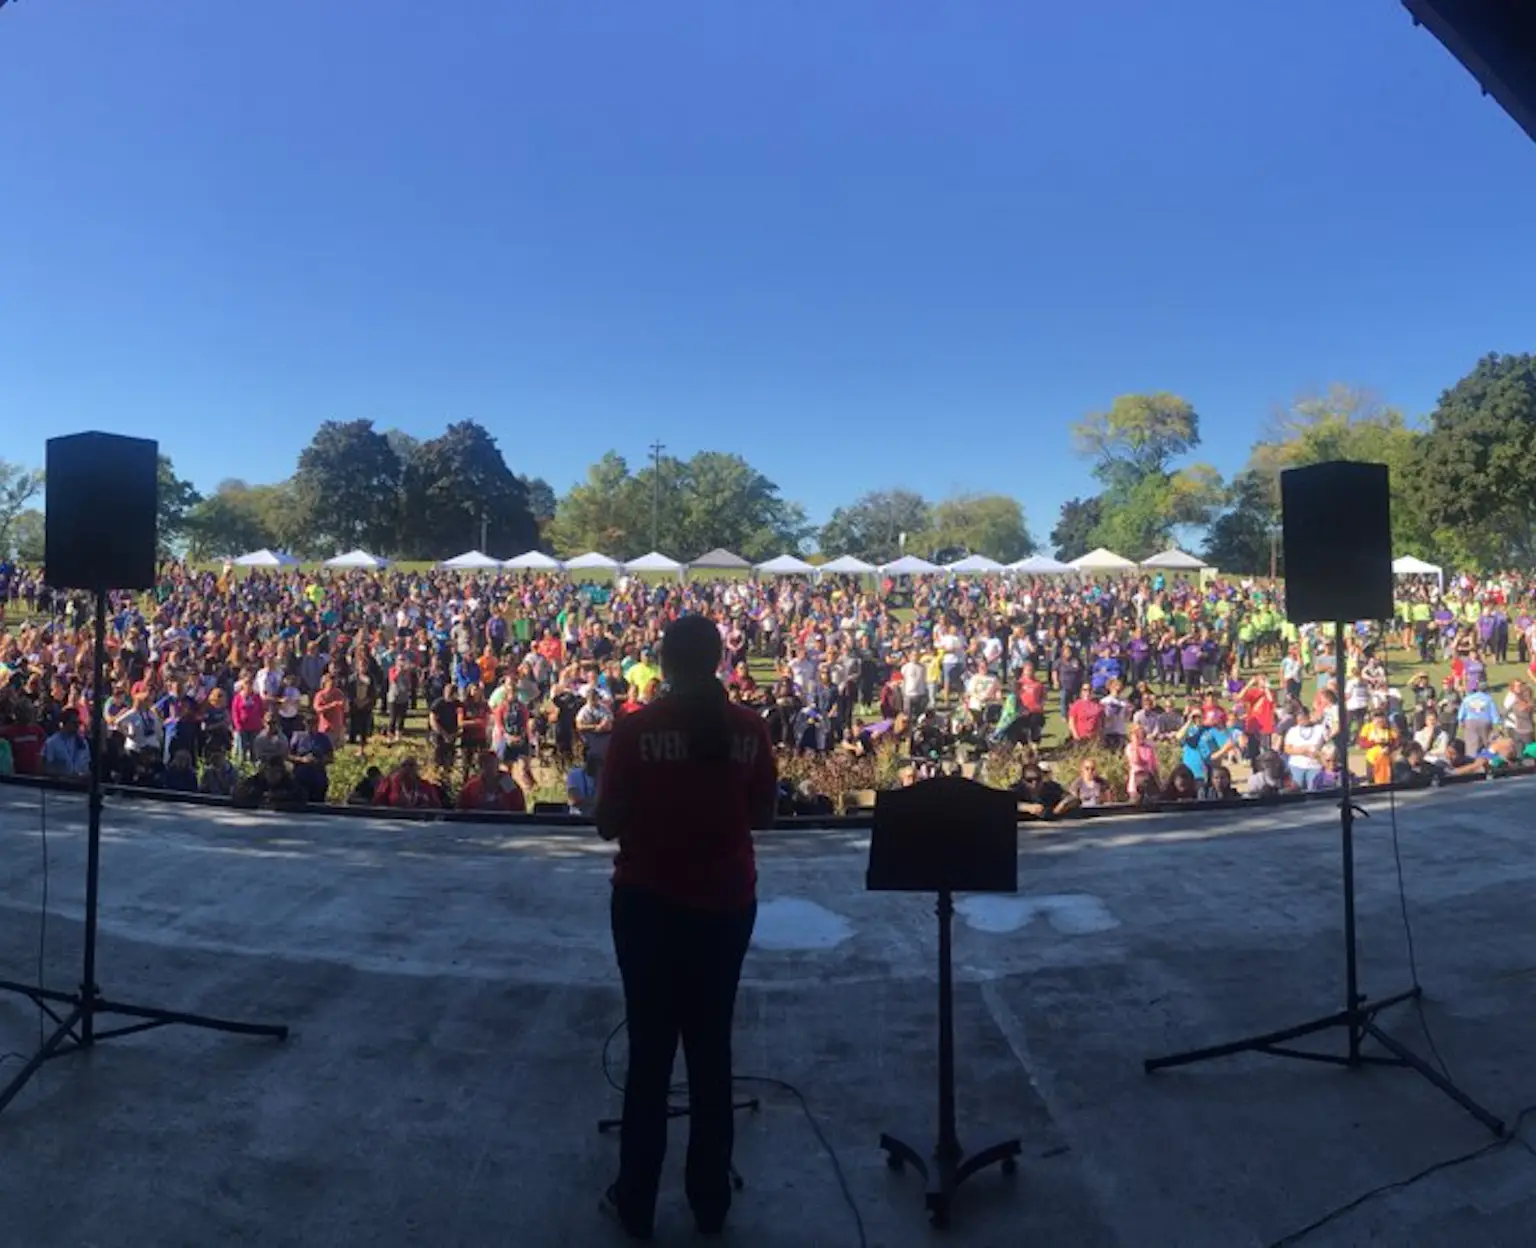 View from the stage at a Community Walk